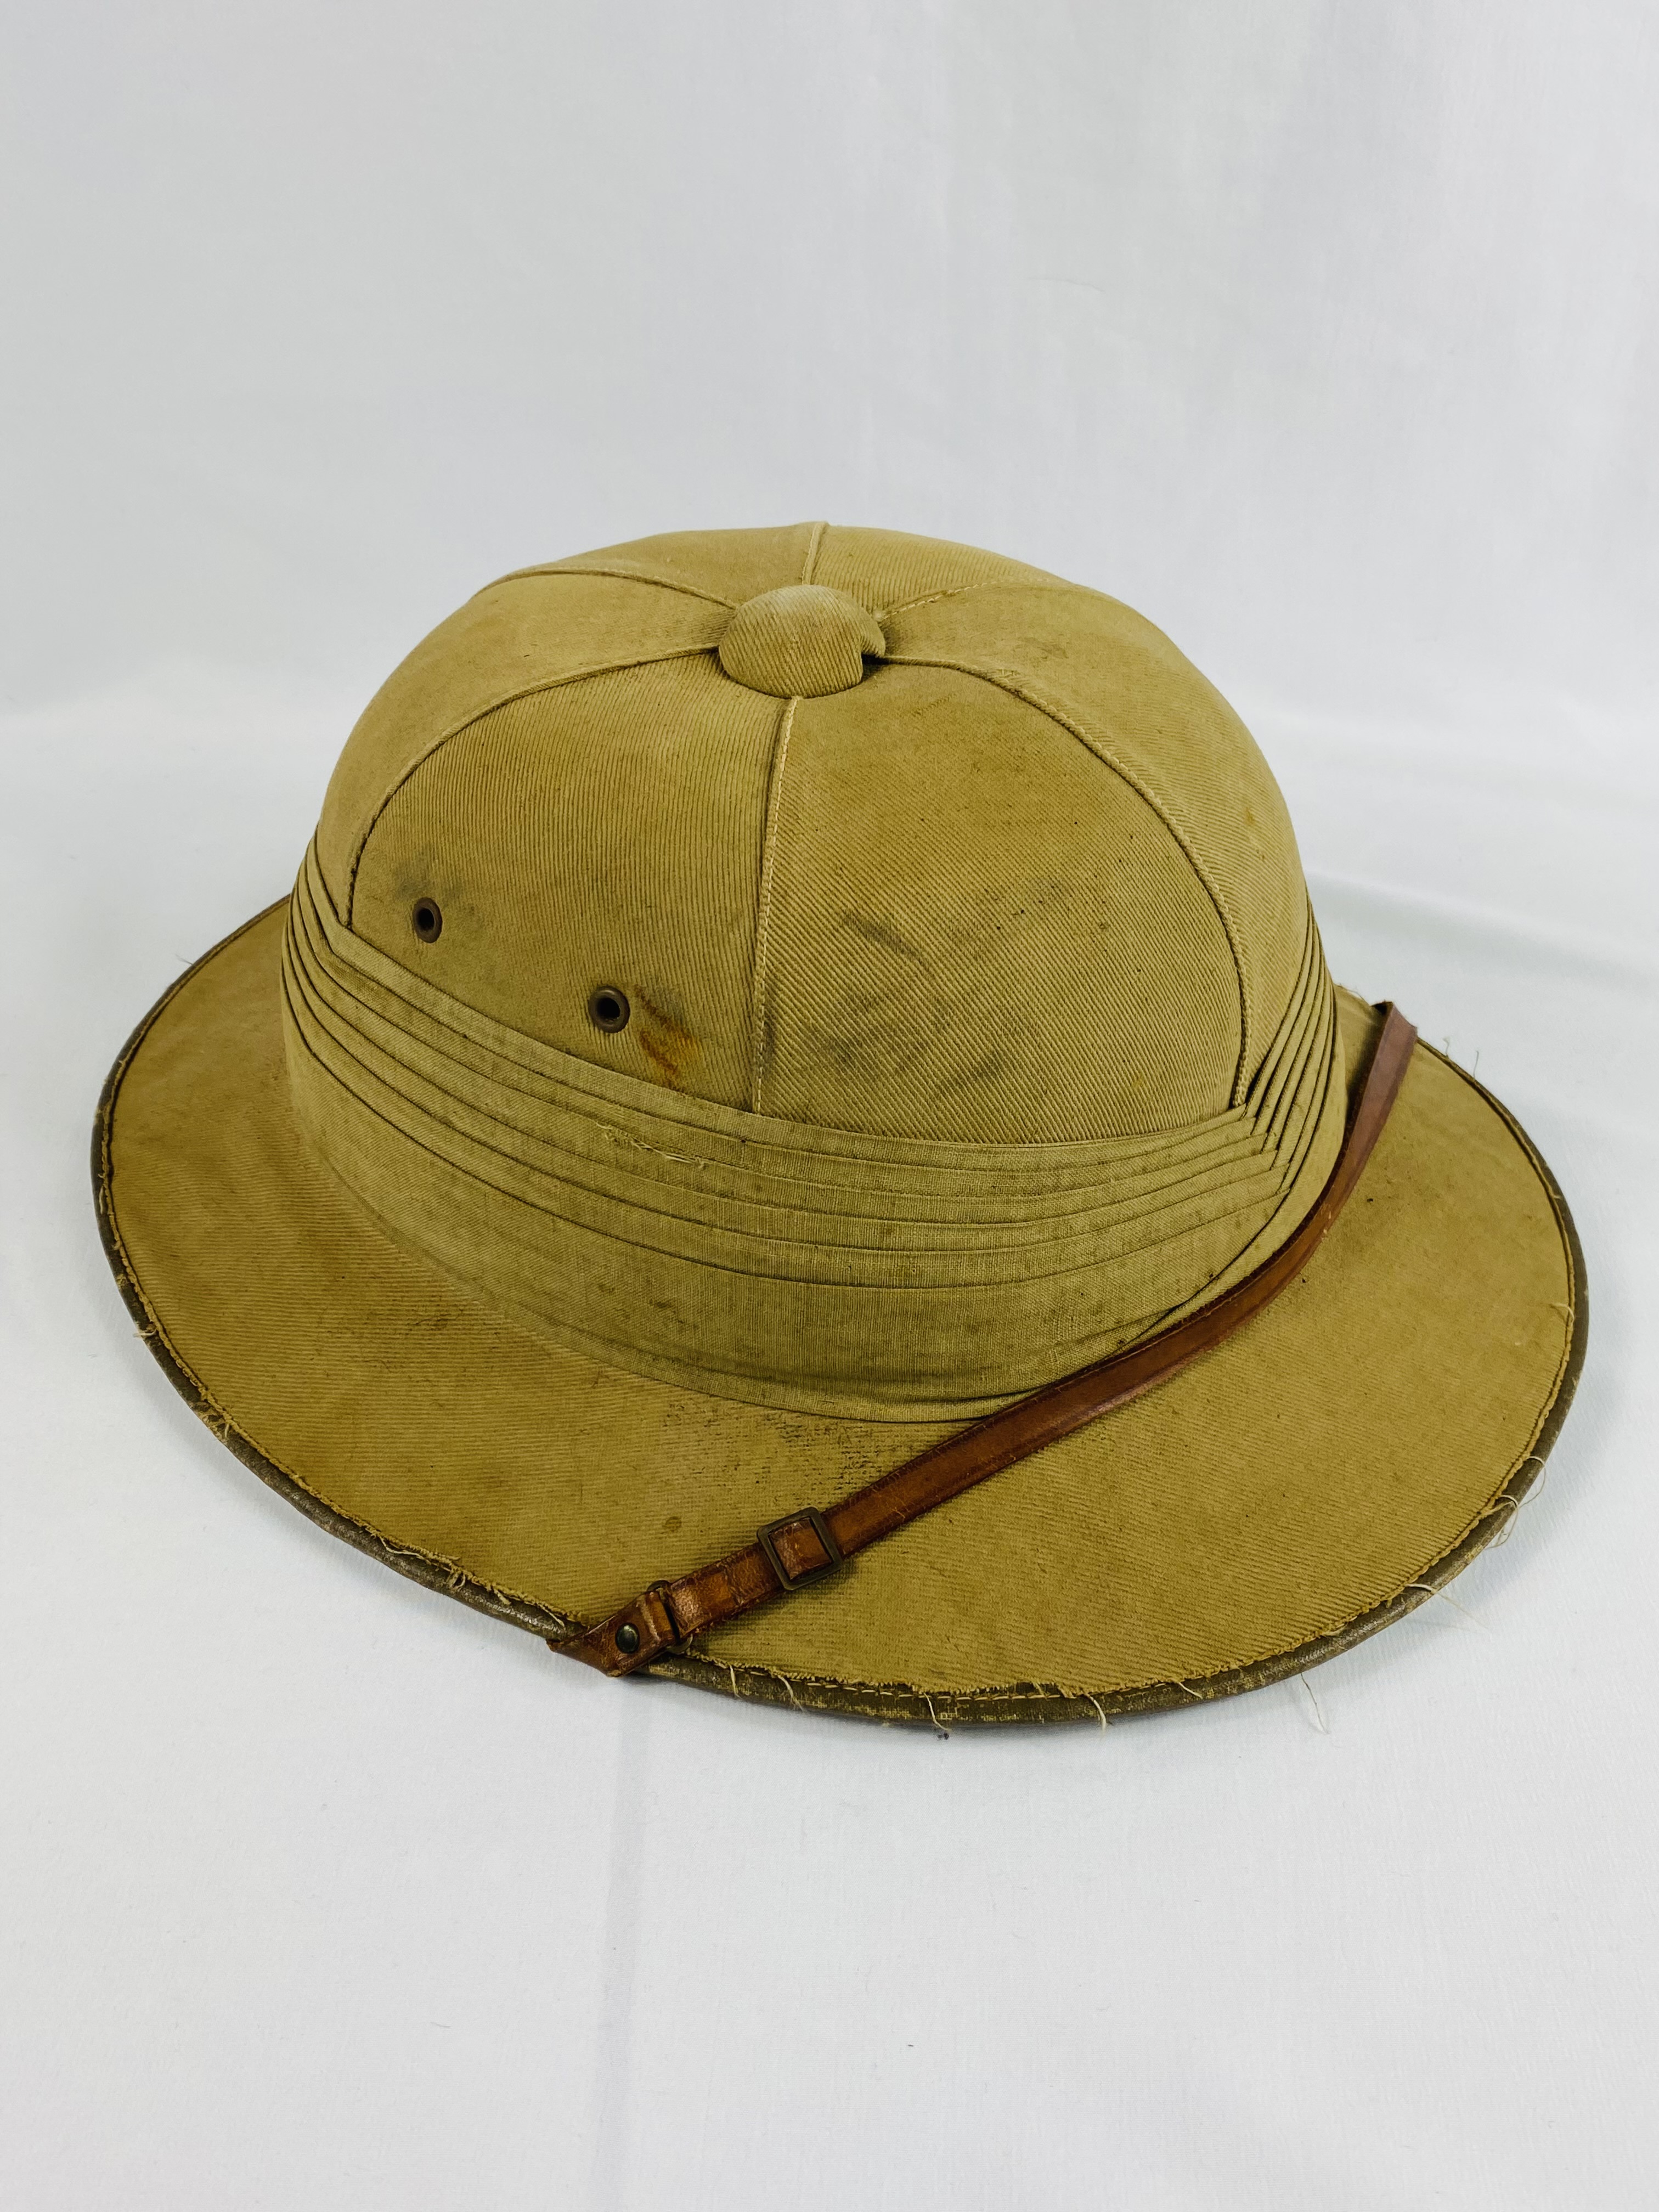 Hawkes pith helmet and two other hats - Image 3 of 7